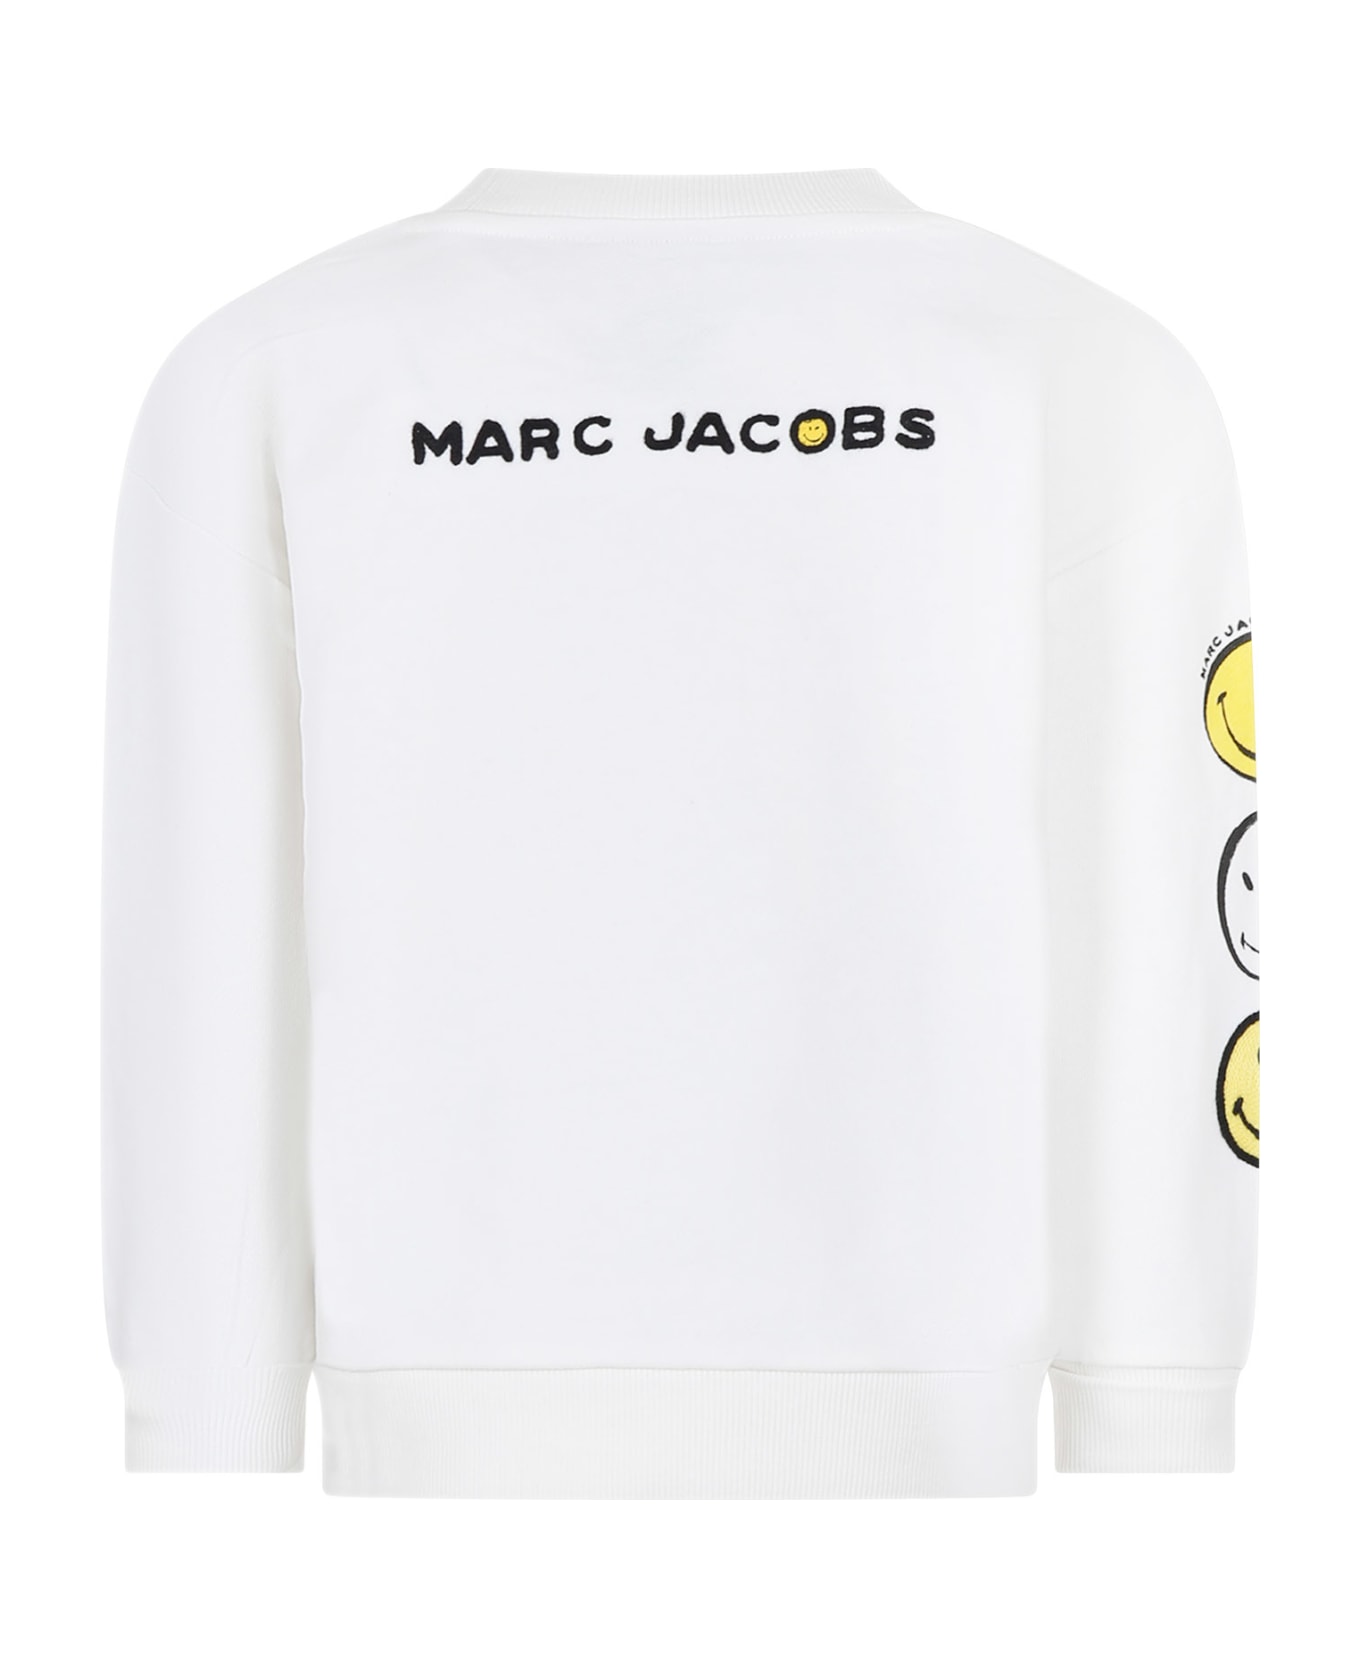 Marc Jacobs White Sweatshirt For Boy With Smiley And Logo - White